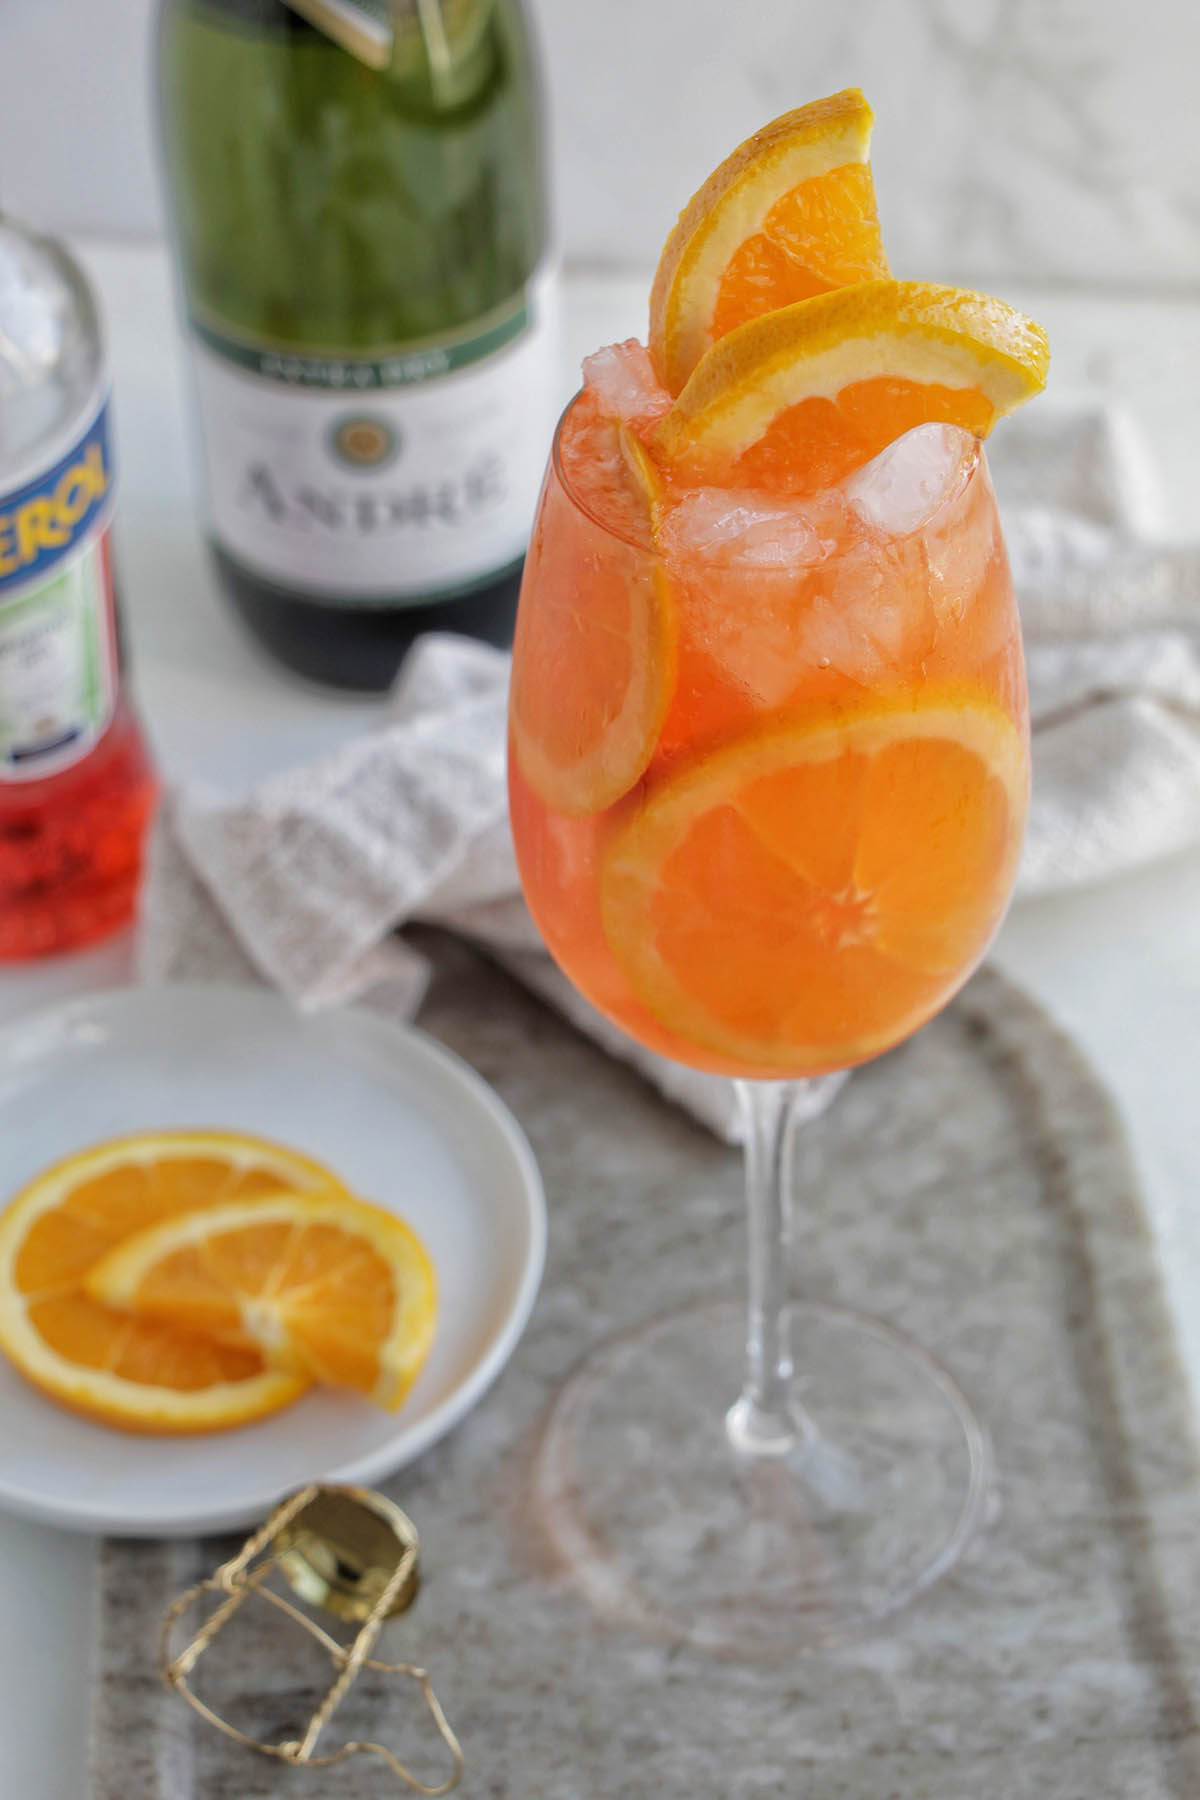 Italian aperol spritz in a wine glass with oranges and slices of oranges on a plate